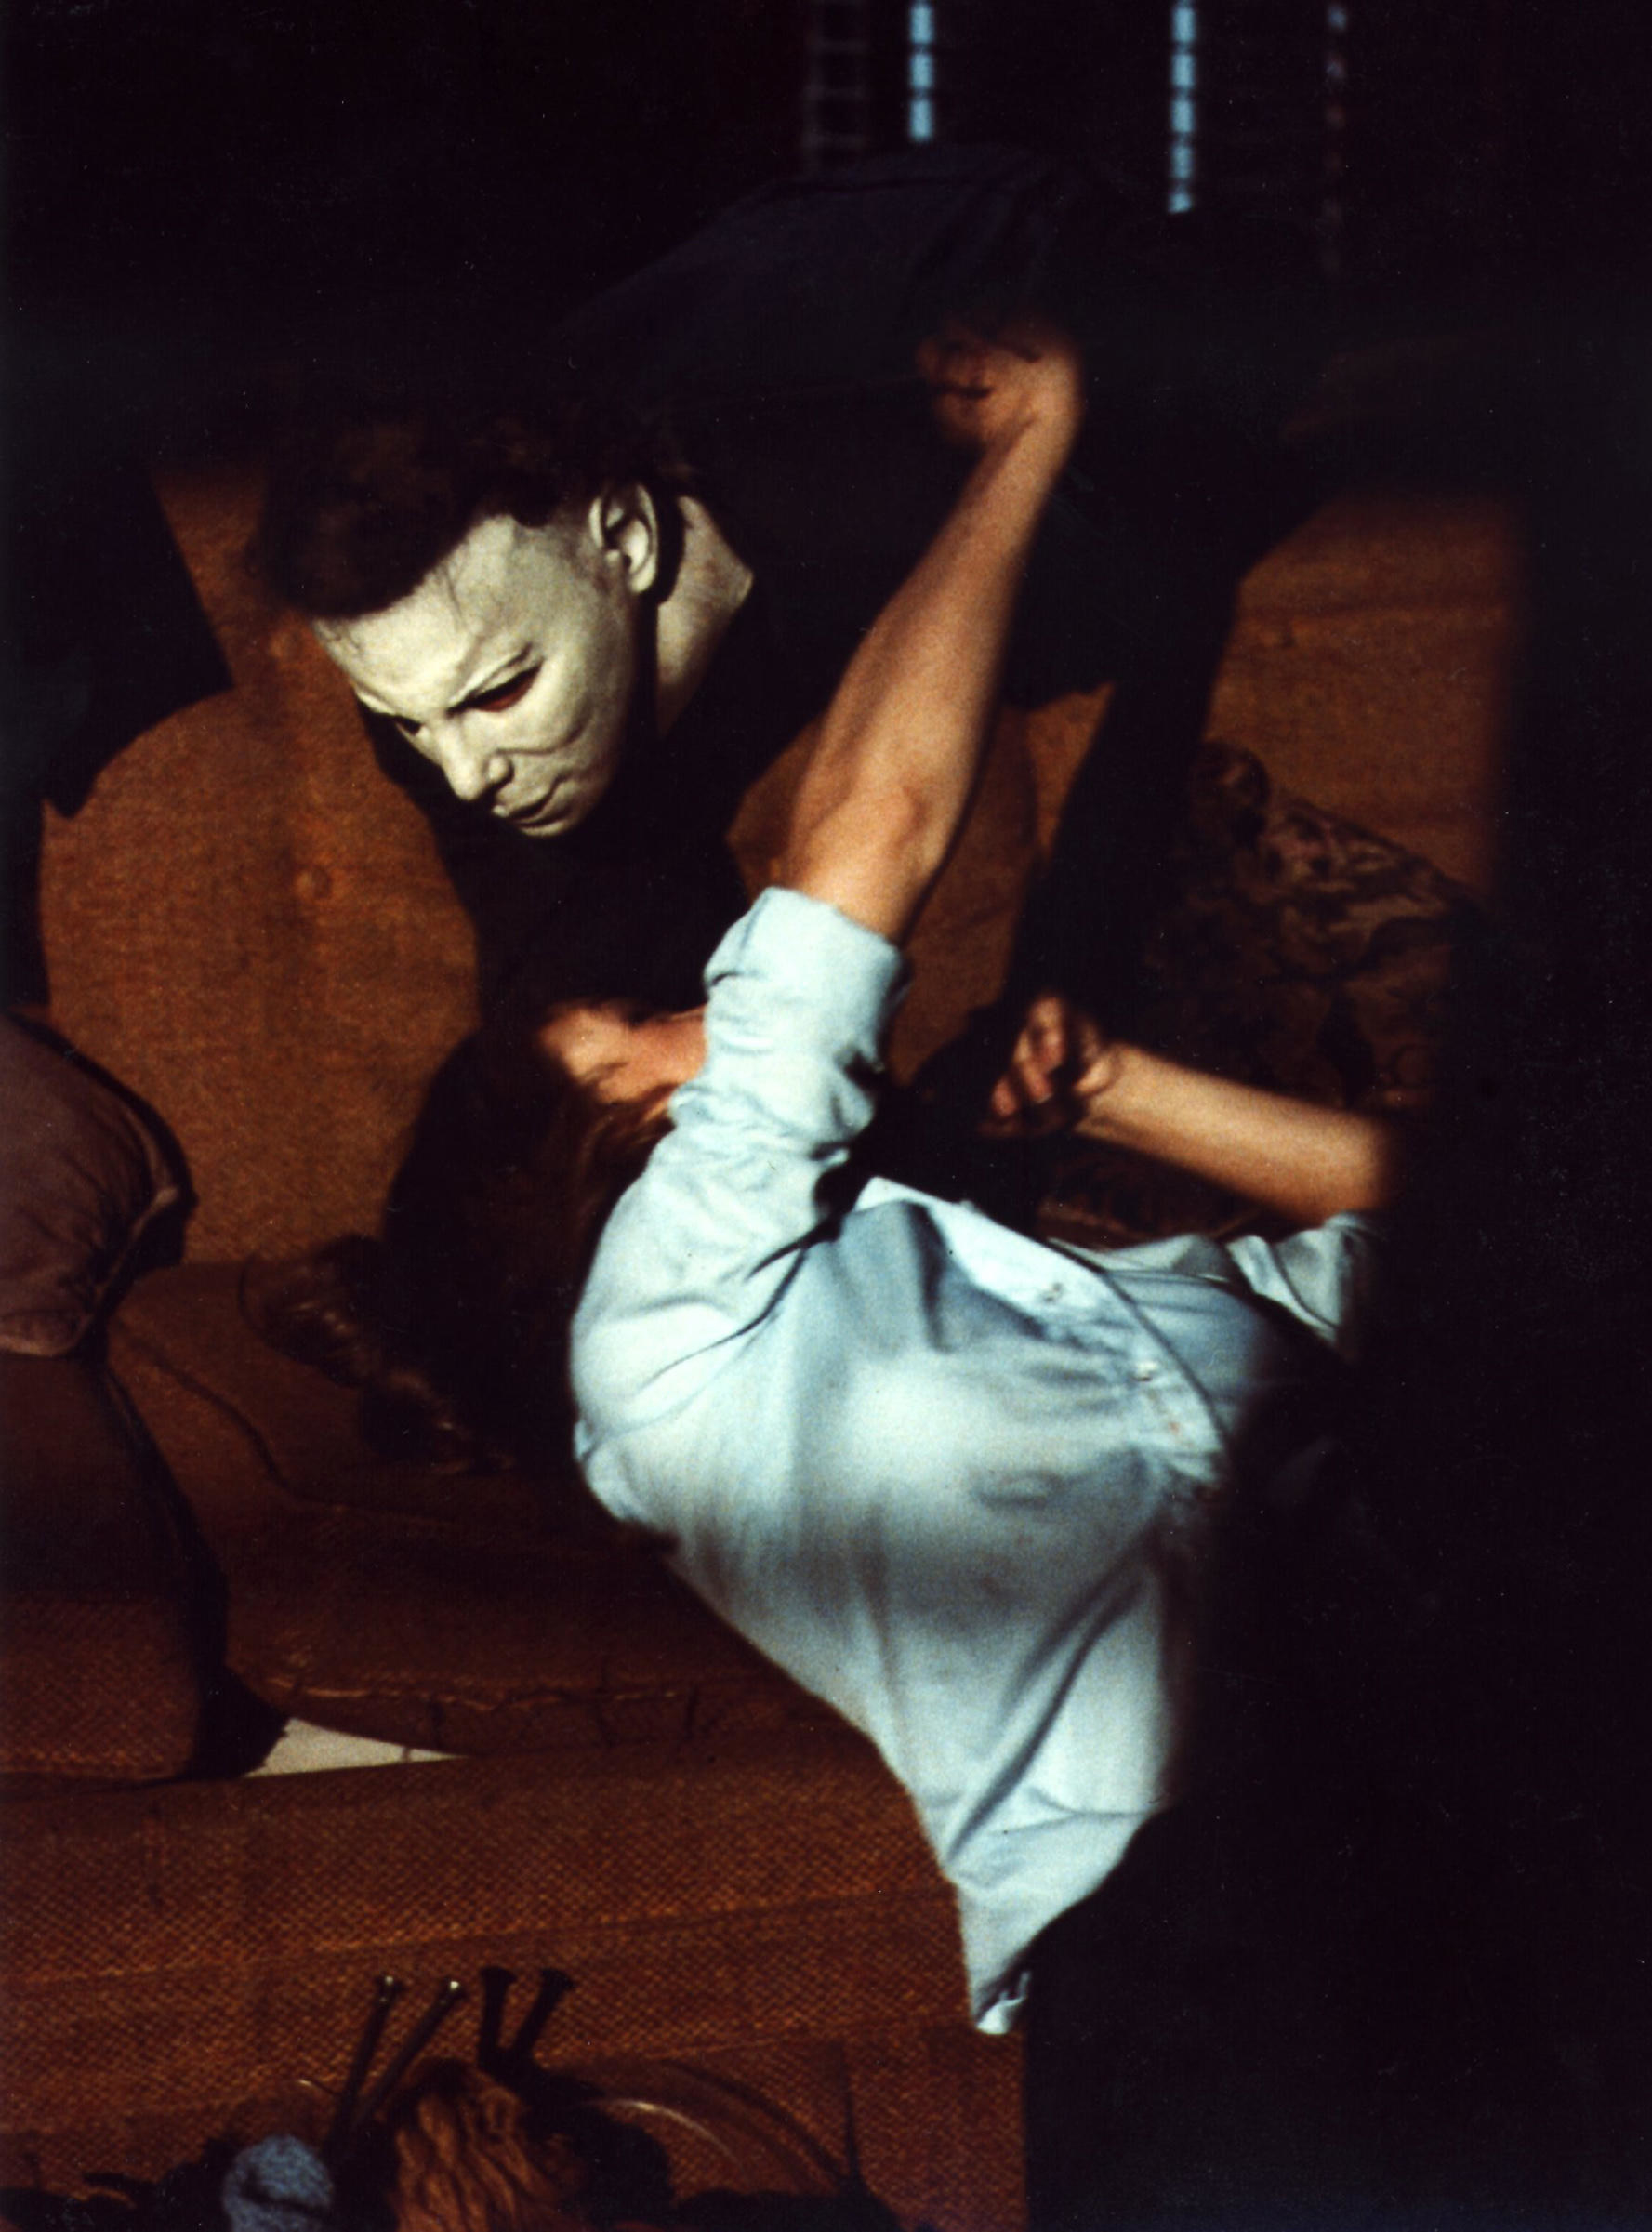 Michael Myers attacking Laurie Strode on a couch